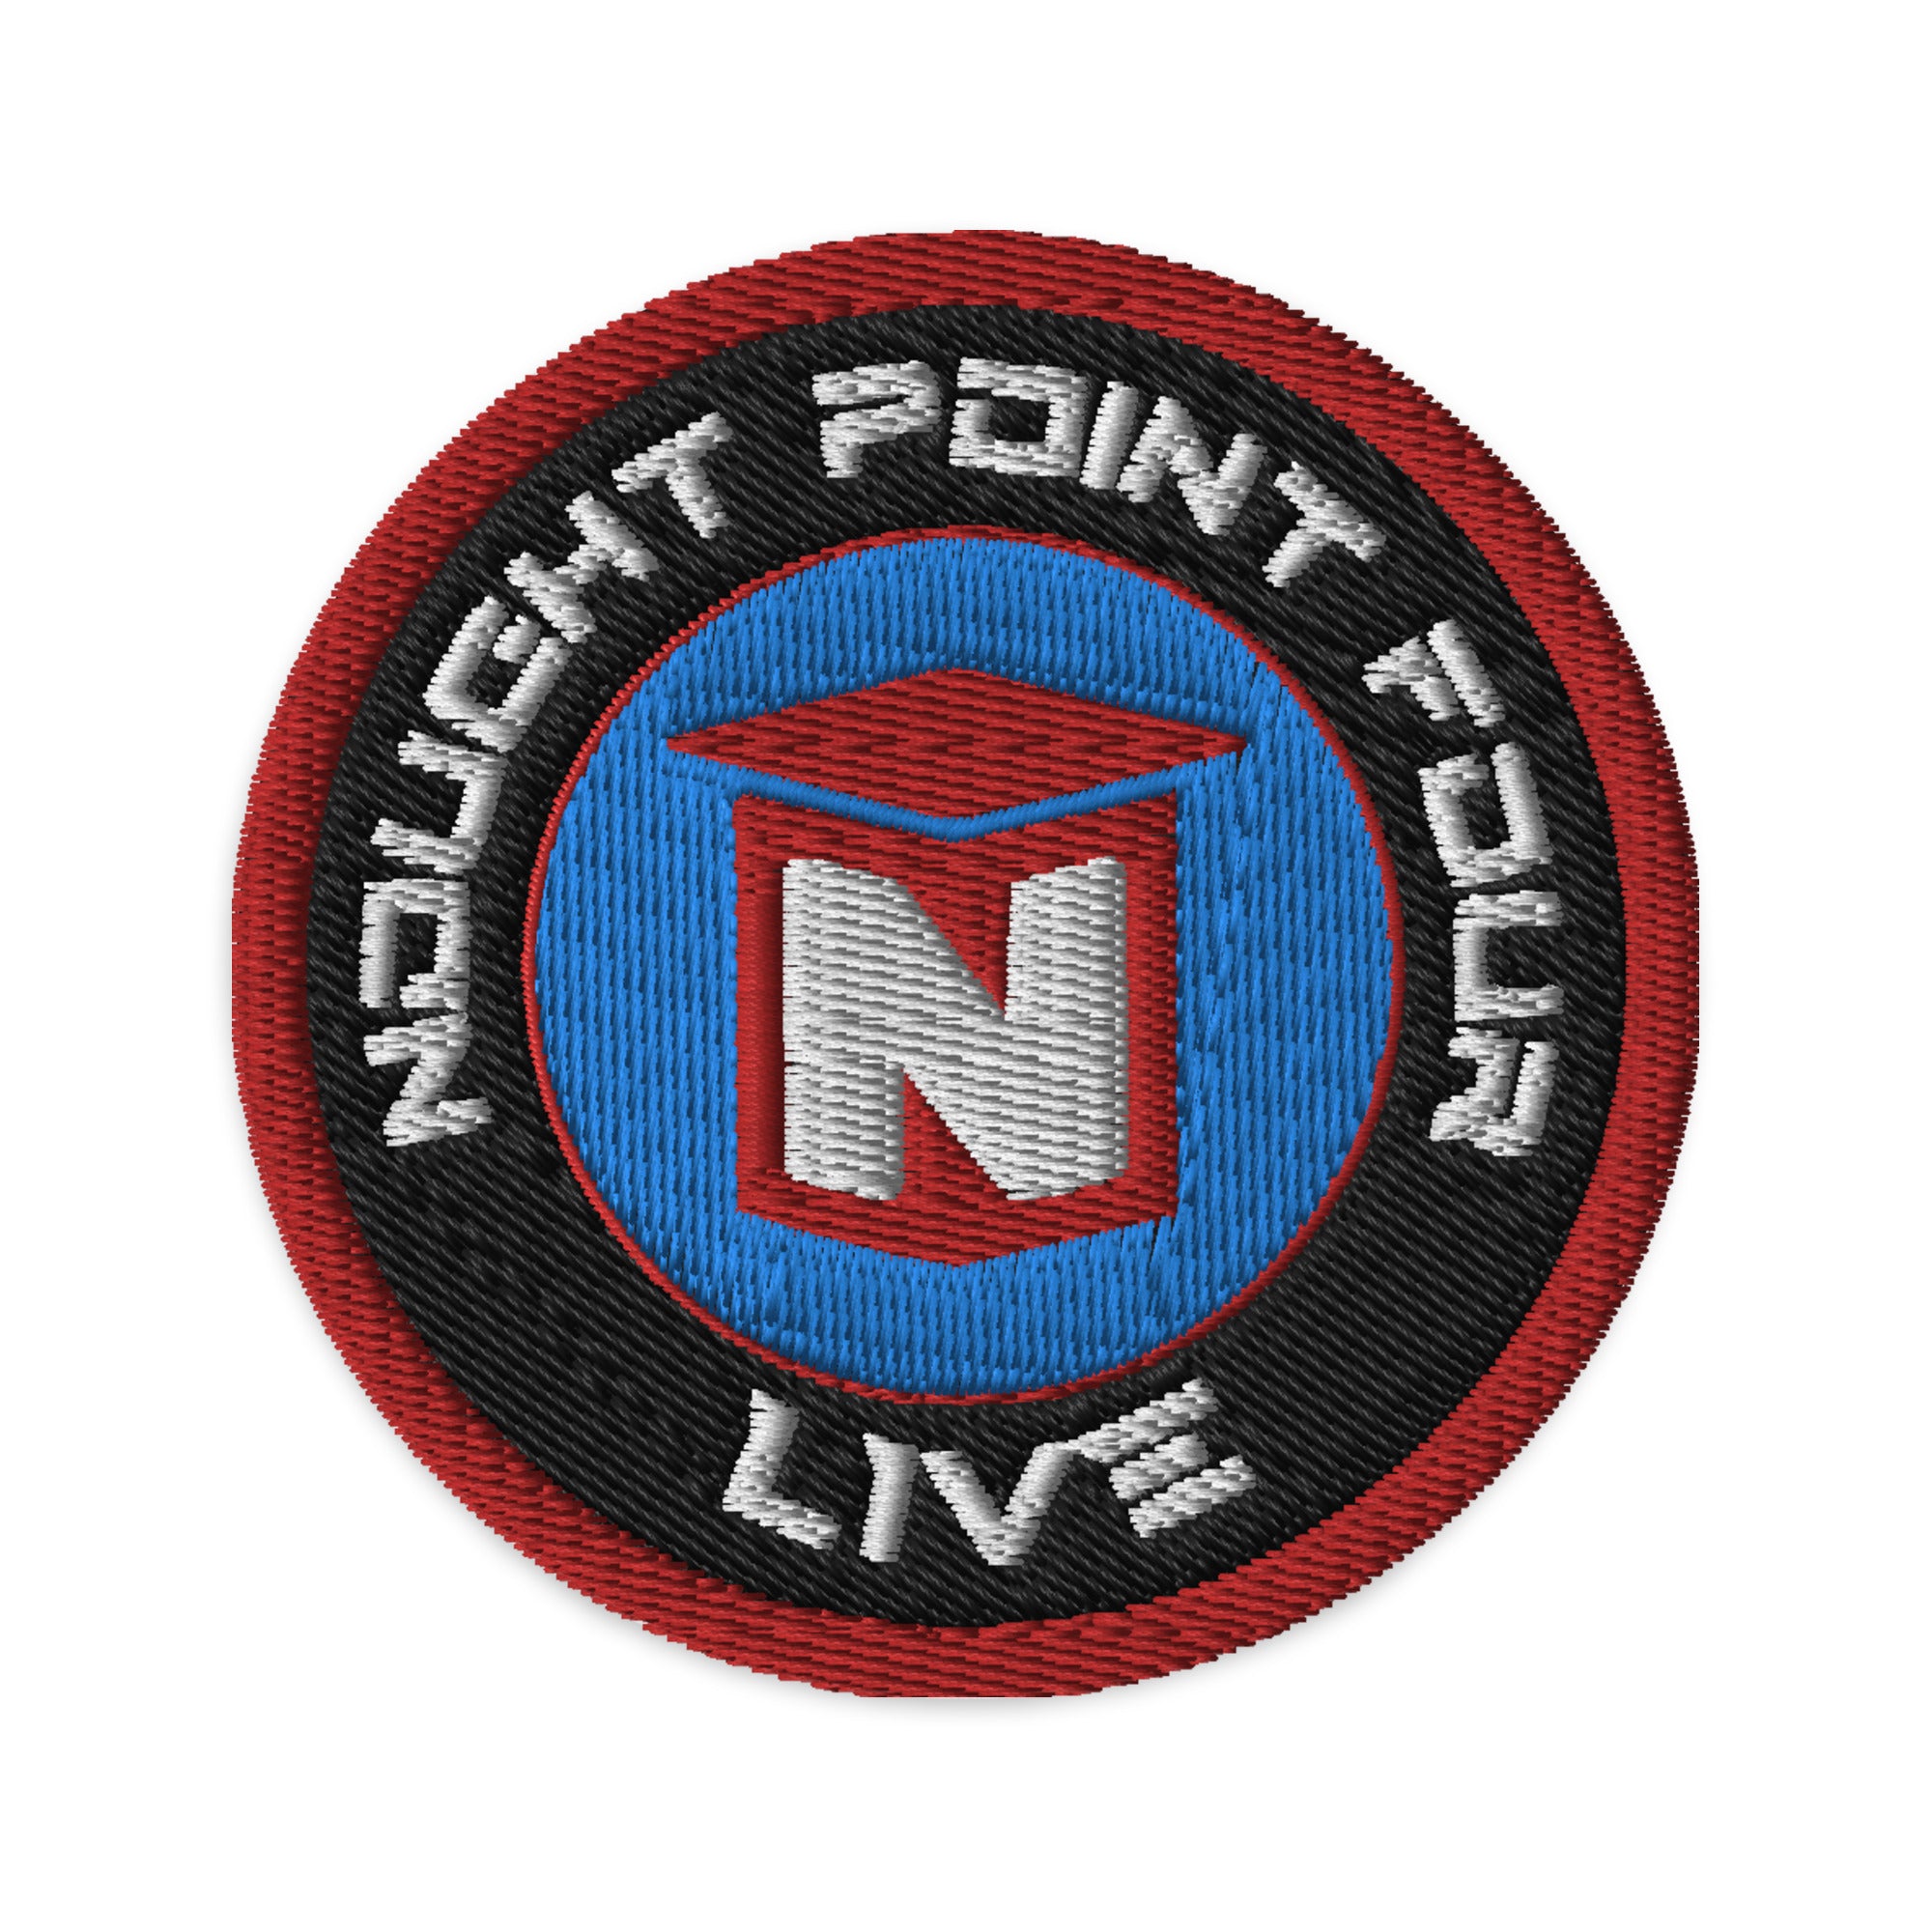 Nought Point Four Live Original Embroidered Patche